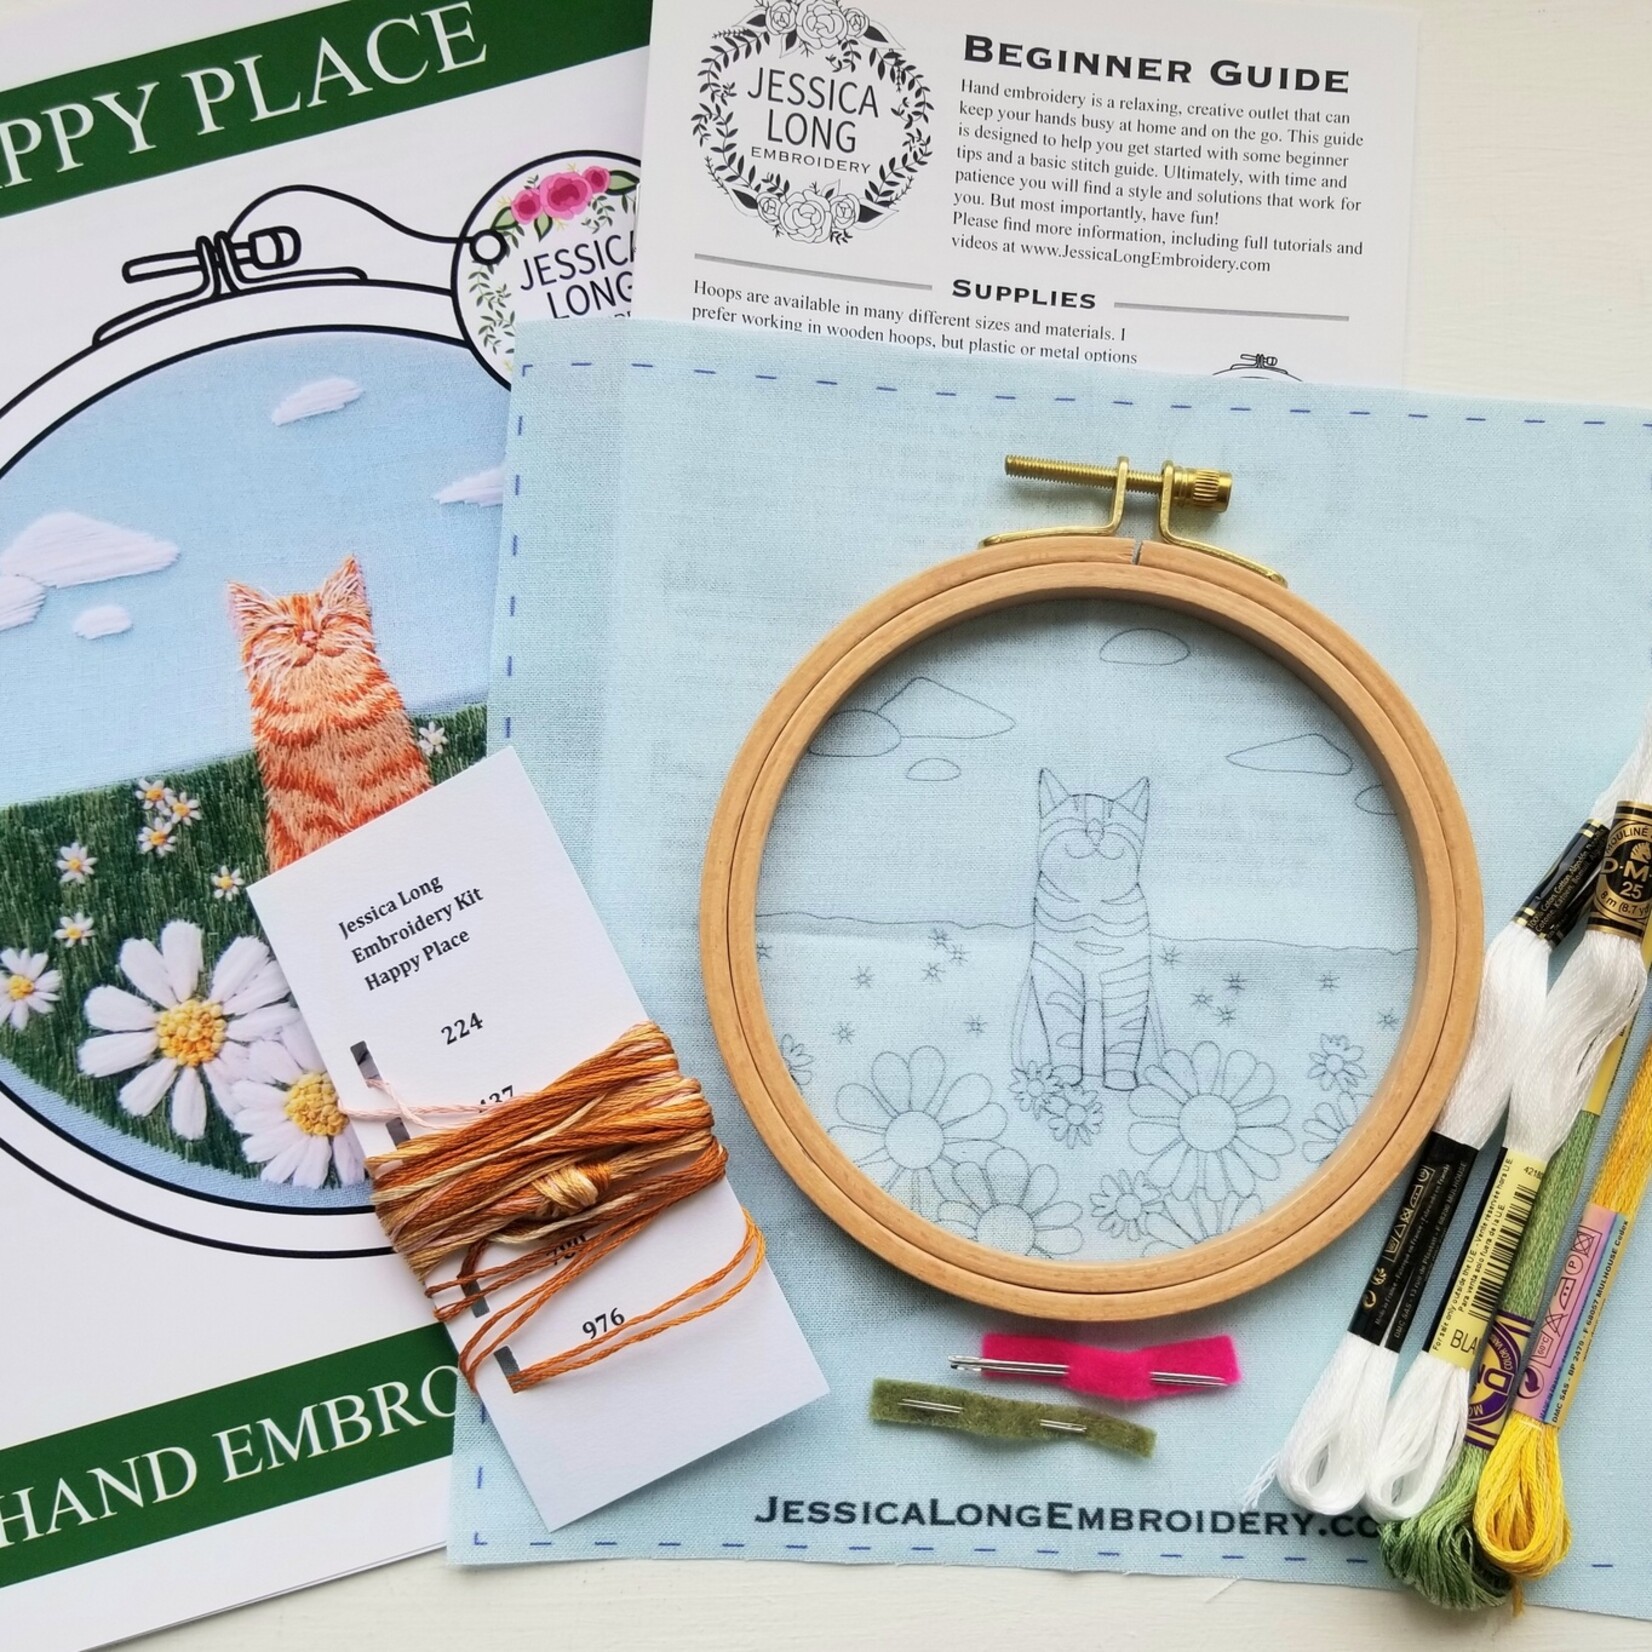 Jessica Long Embroidery Kit